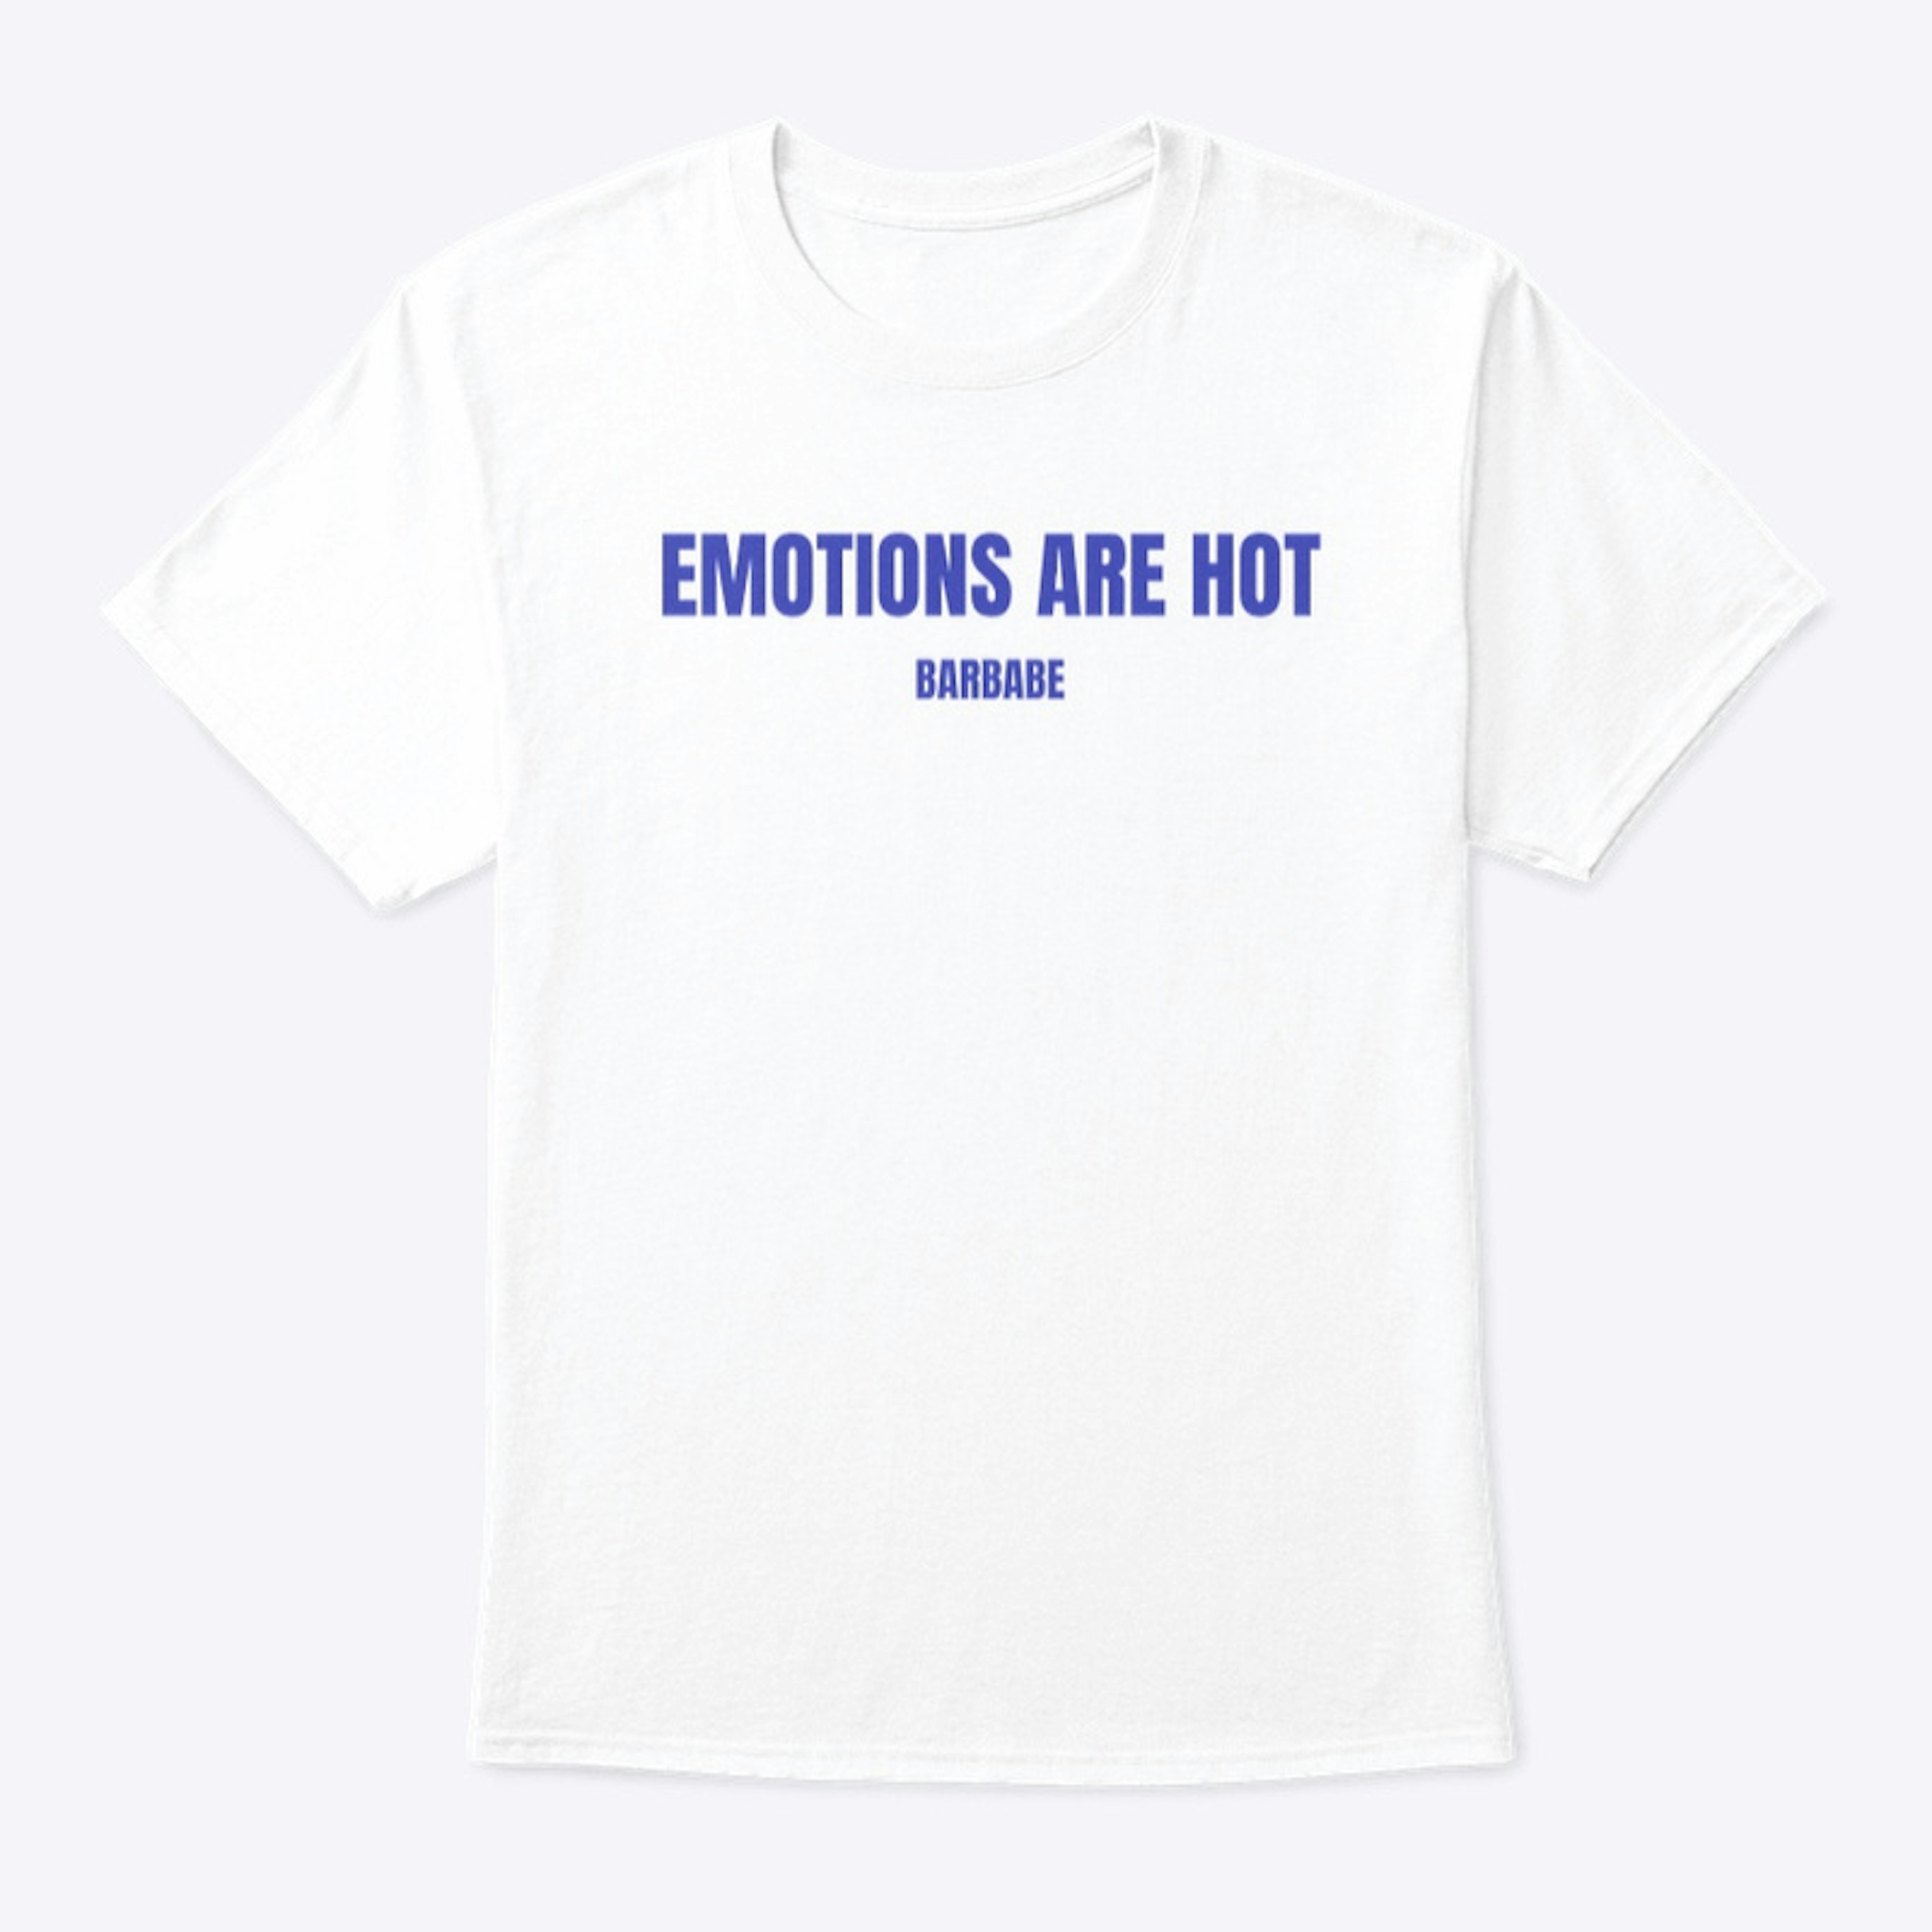 MENTAL HEALTH MATTERS: EMOTIONS ARE HOT